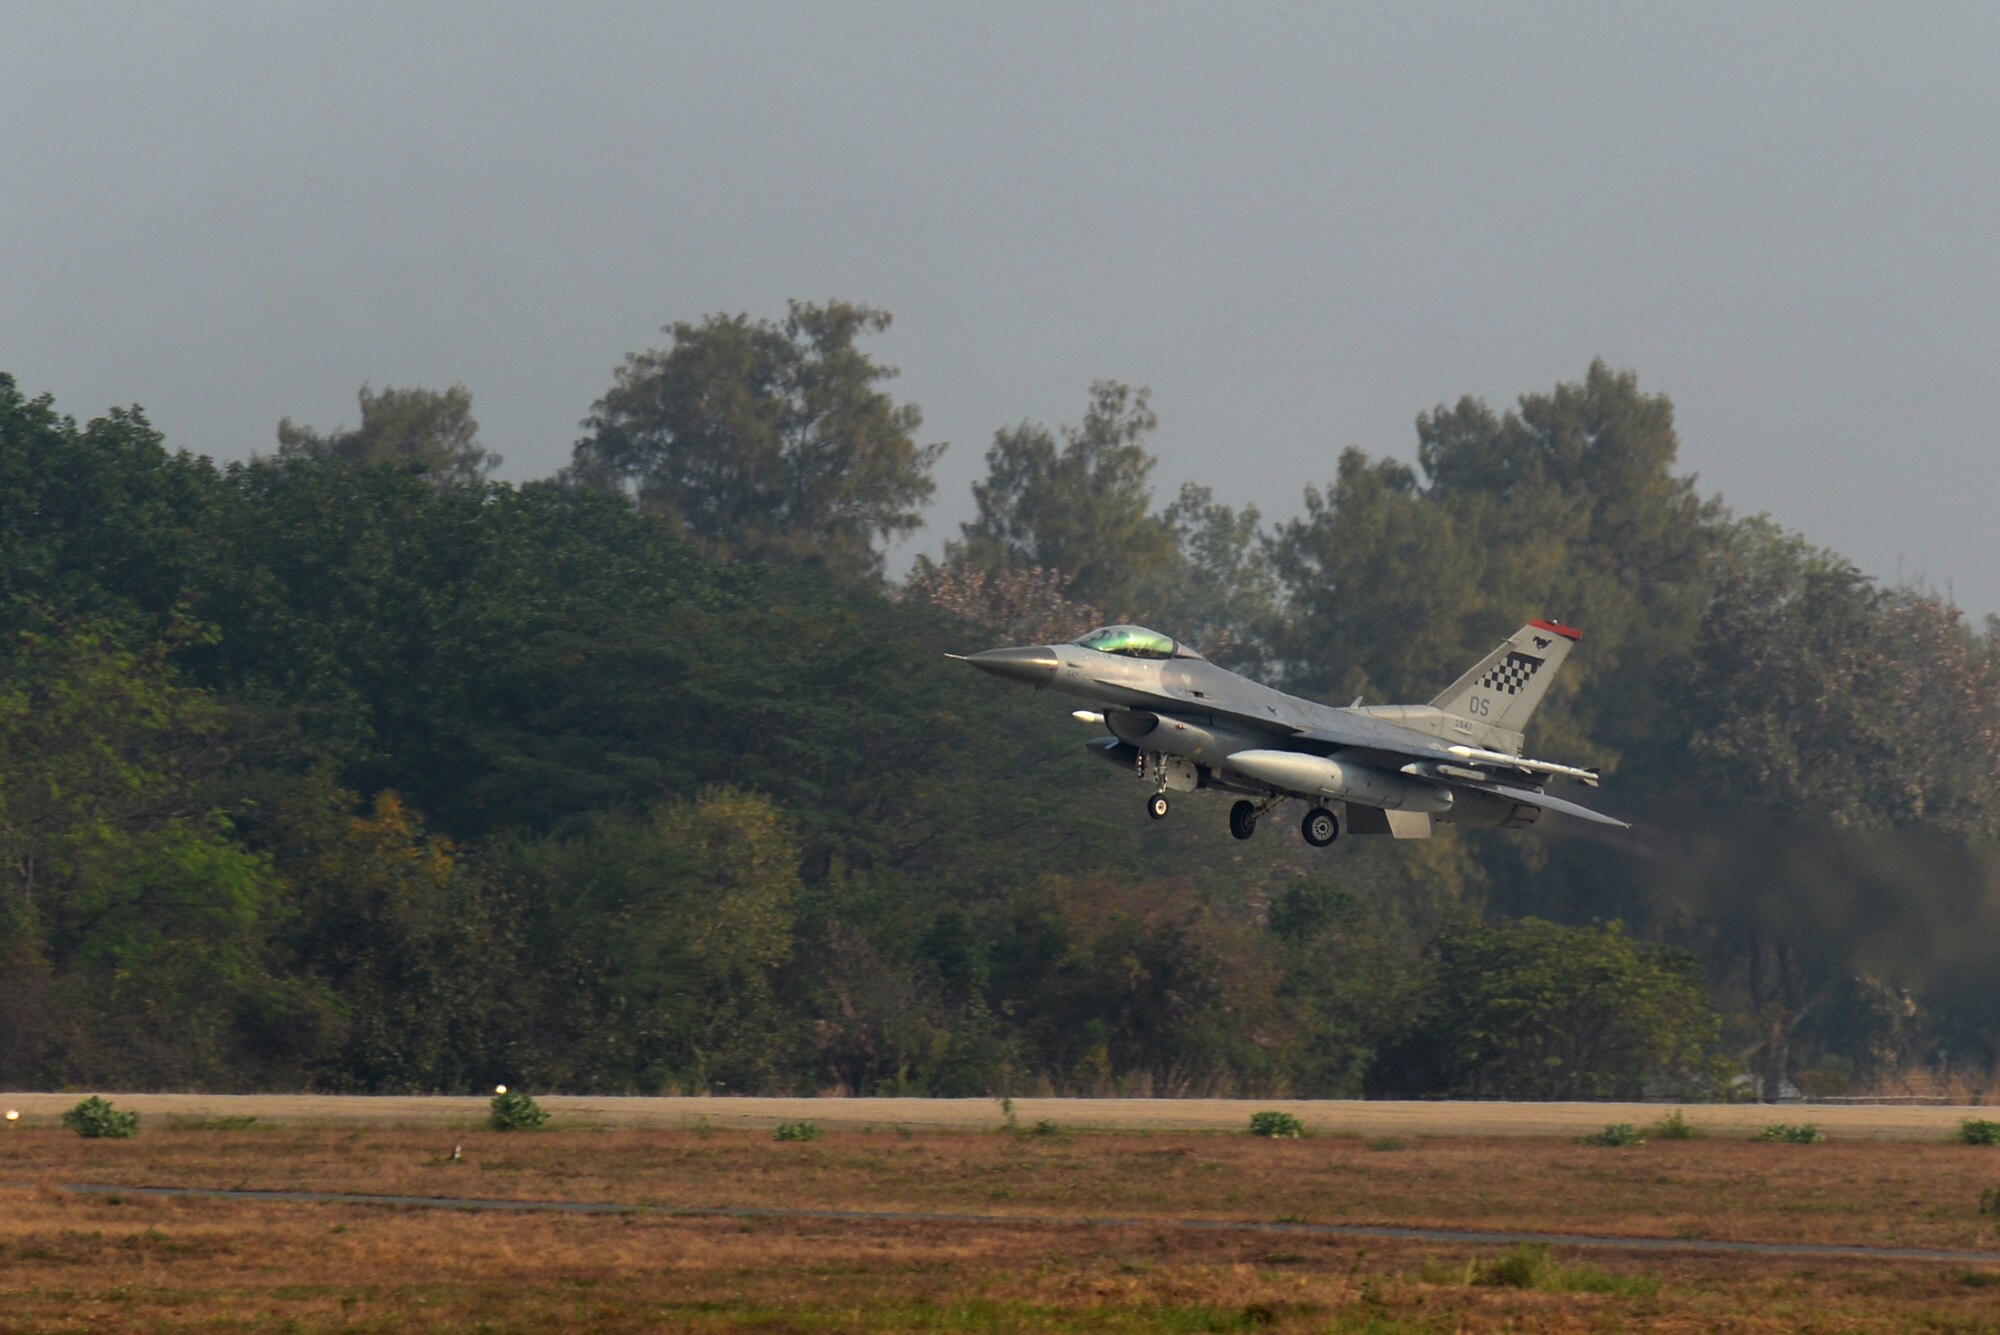 A U.S. Air Force F-16 Fighting Falcon takes off Feb. 15, 2016, at Korat Royal Thai Air Force Base, Thailand. Piloted by 1st Lt. Brittany Trimble, 36th Fighter Squadron pilot, this F-16 along with several other aircraft and pilots visited Thailand to participate in Cobra Gold 2016, a multinational exercise. This trip was Trimble’s first experience flying in a multinational exercise. (U.S. Air Force photo by Staff Sgt. Amber E. N. Jacobs)